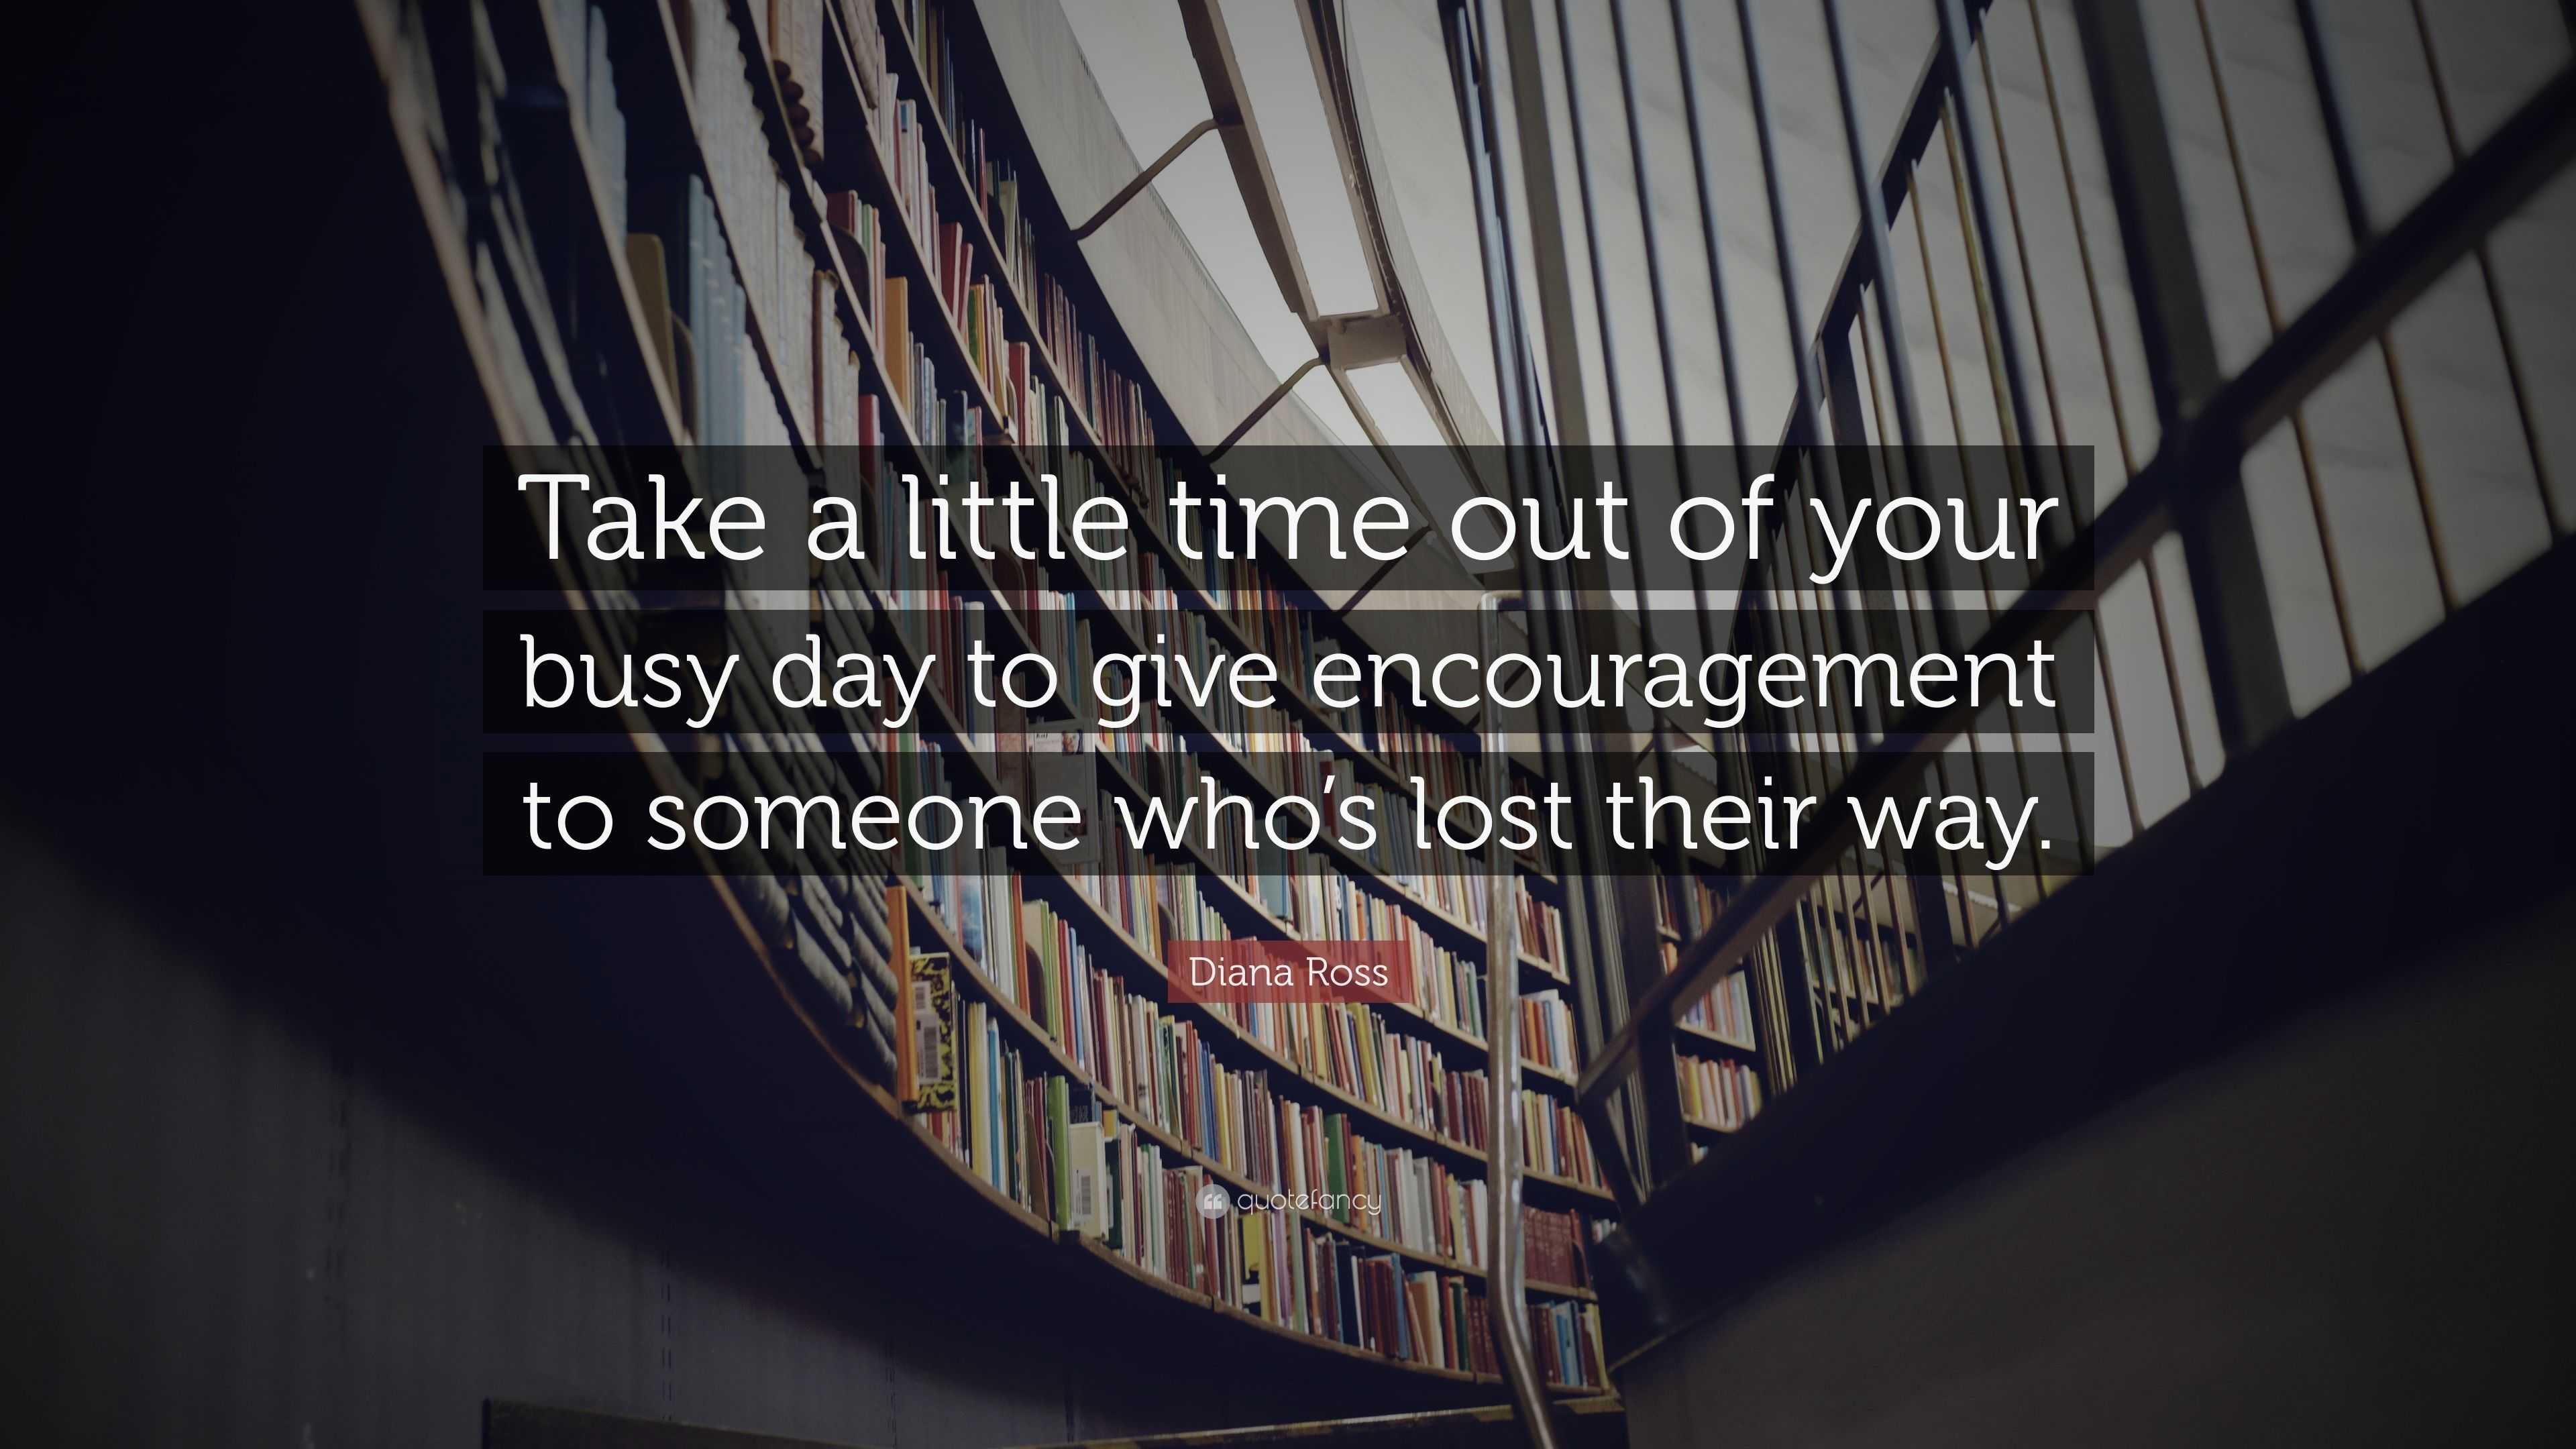 appreciate your taking time out of your busy schedule